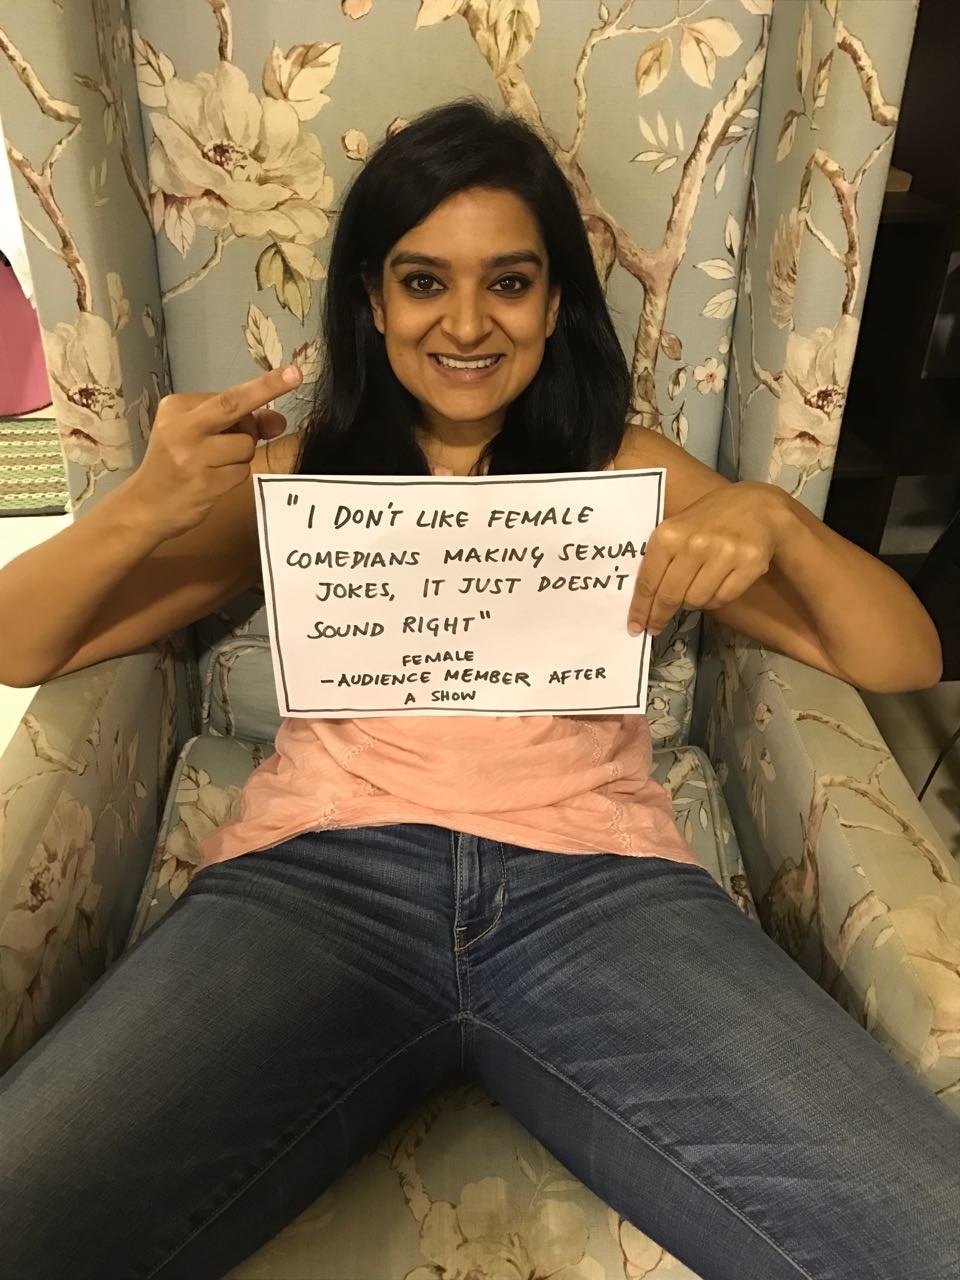 19 Indian Women Reveal Offensive, Sexist Remarks Theyve Heard At Work